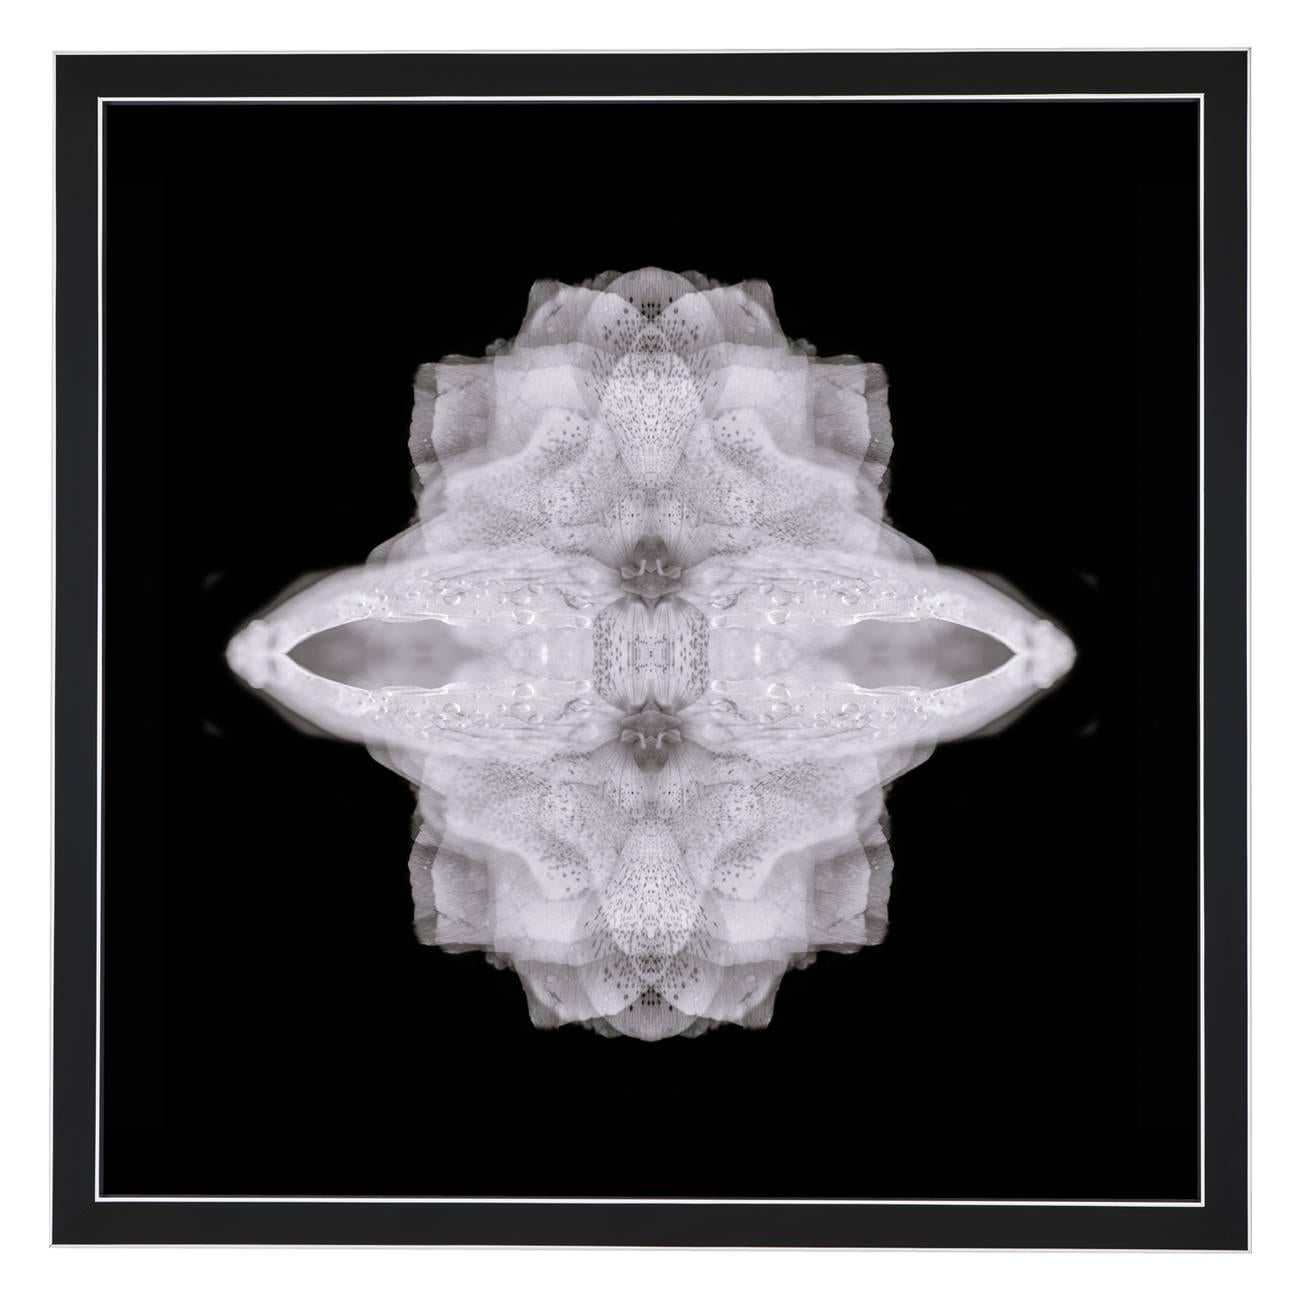 Composition:
Restio, Chamelia.

Limited edition. Each image is uniquely printed directly to 5mm acrylic glass using UV cured pigment inks giving each photograph real depth and clarity. Every picture is beautifully framed in-house with a gloss black